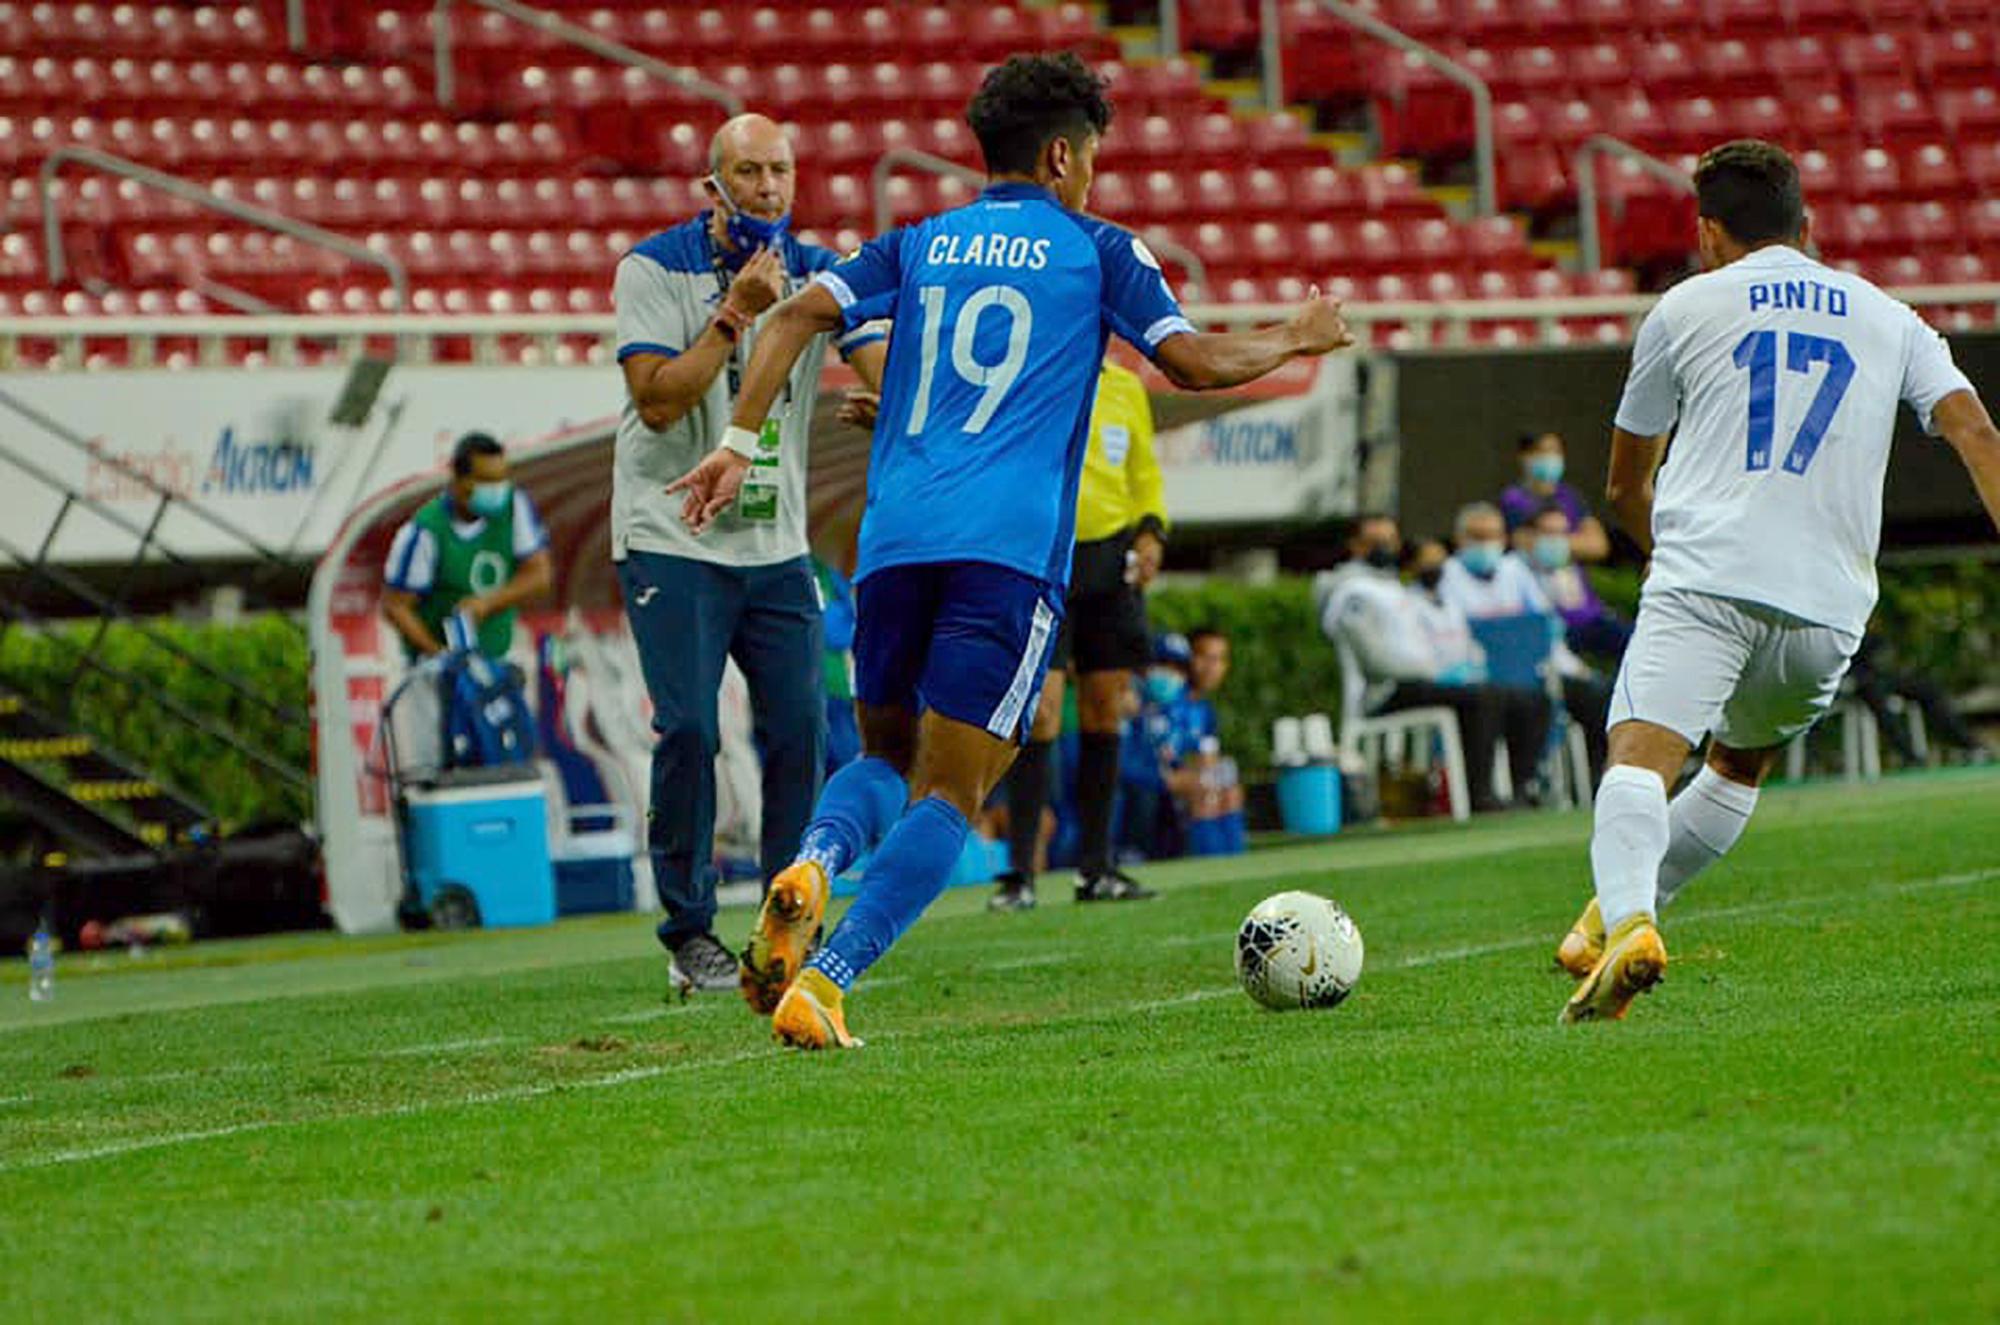 Lizandro Claros during the match against Honduras, on March 22nd, during the qualifier tournament for the Olympic Games in Mexico. Photo: Federación Salvadoreña de Fútbol